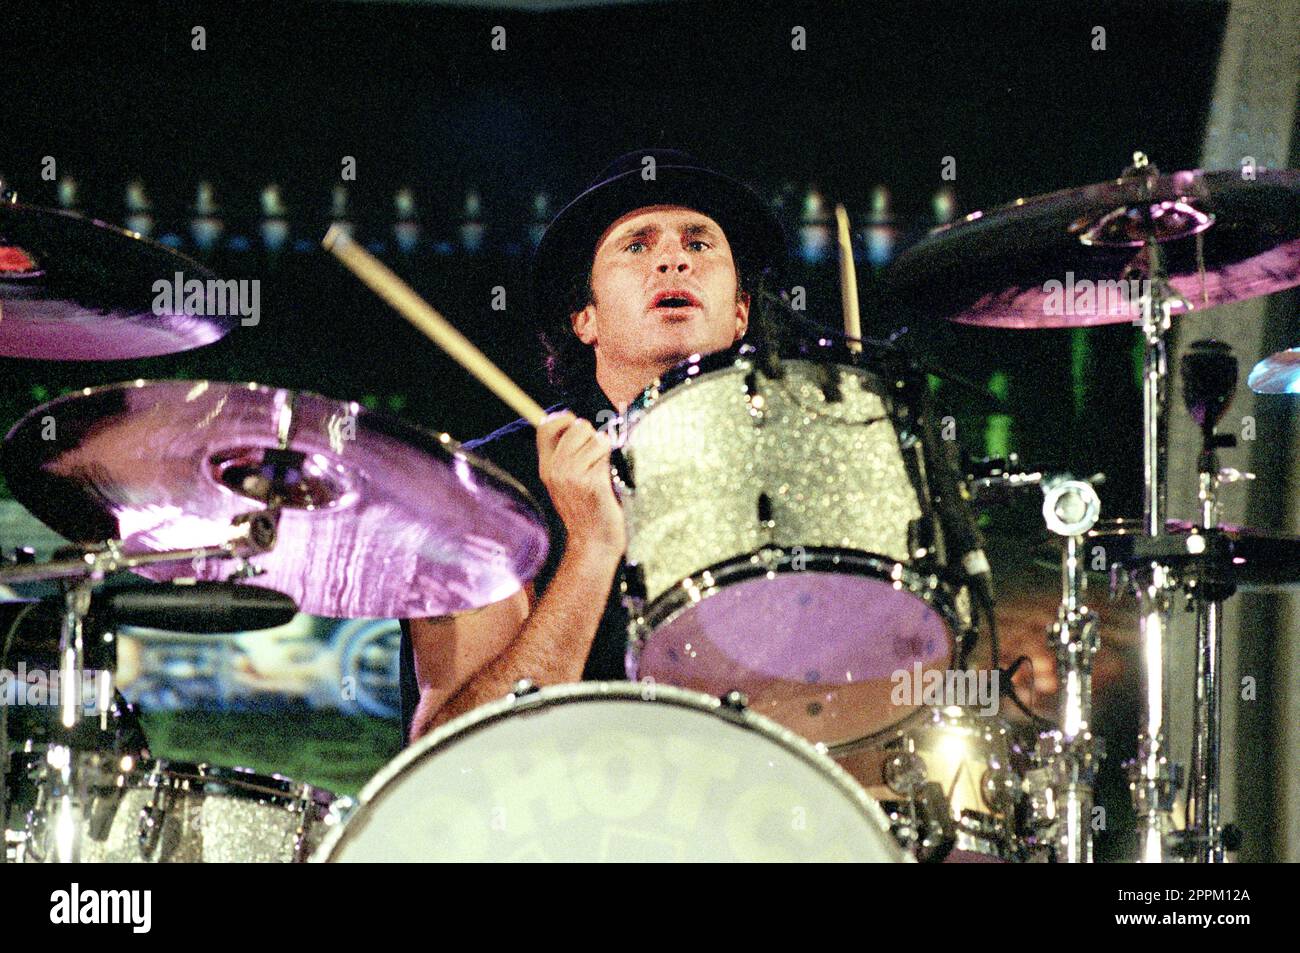 Verona Italy 1999-04-09: The Red Hot Chili Peppers band at the Festivalbar at the Arena , the drummer Chad Smith during the show Stock Photo